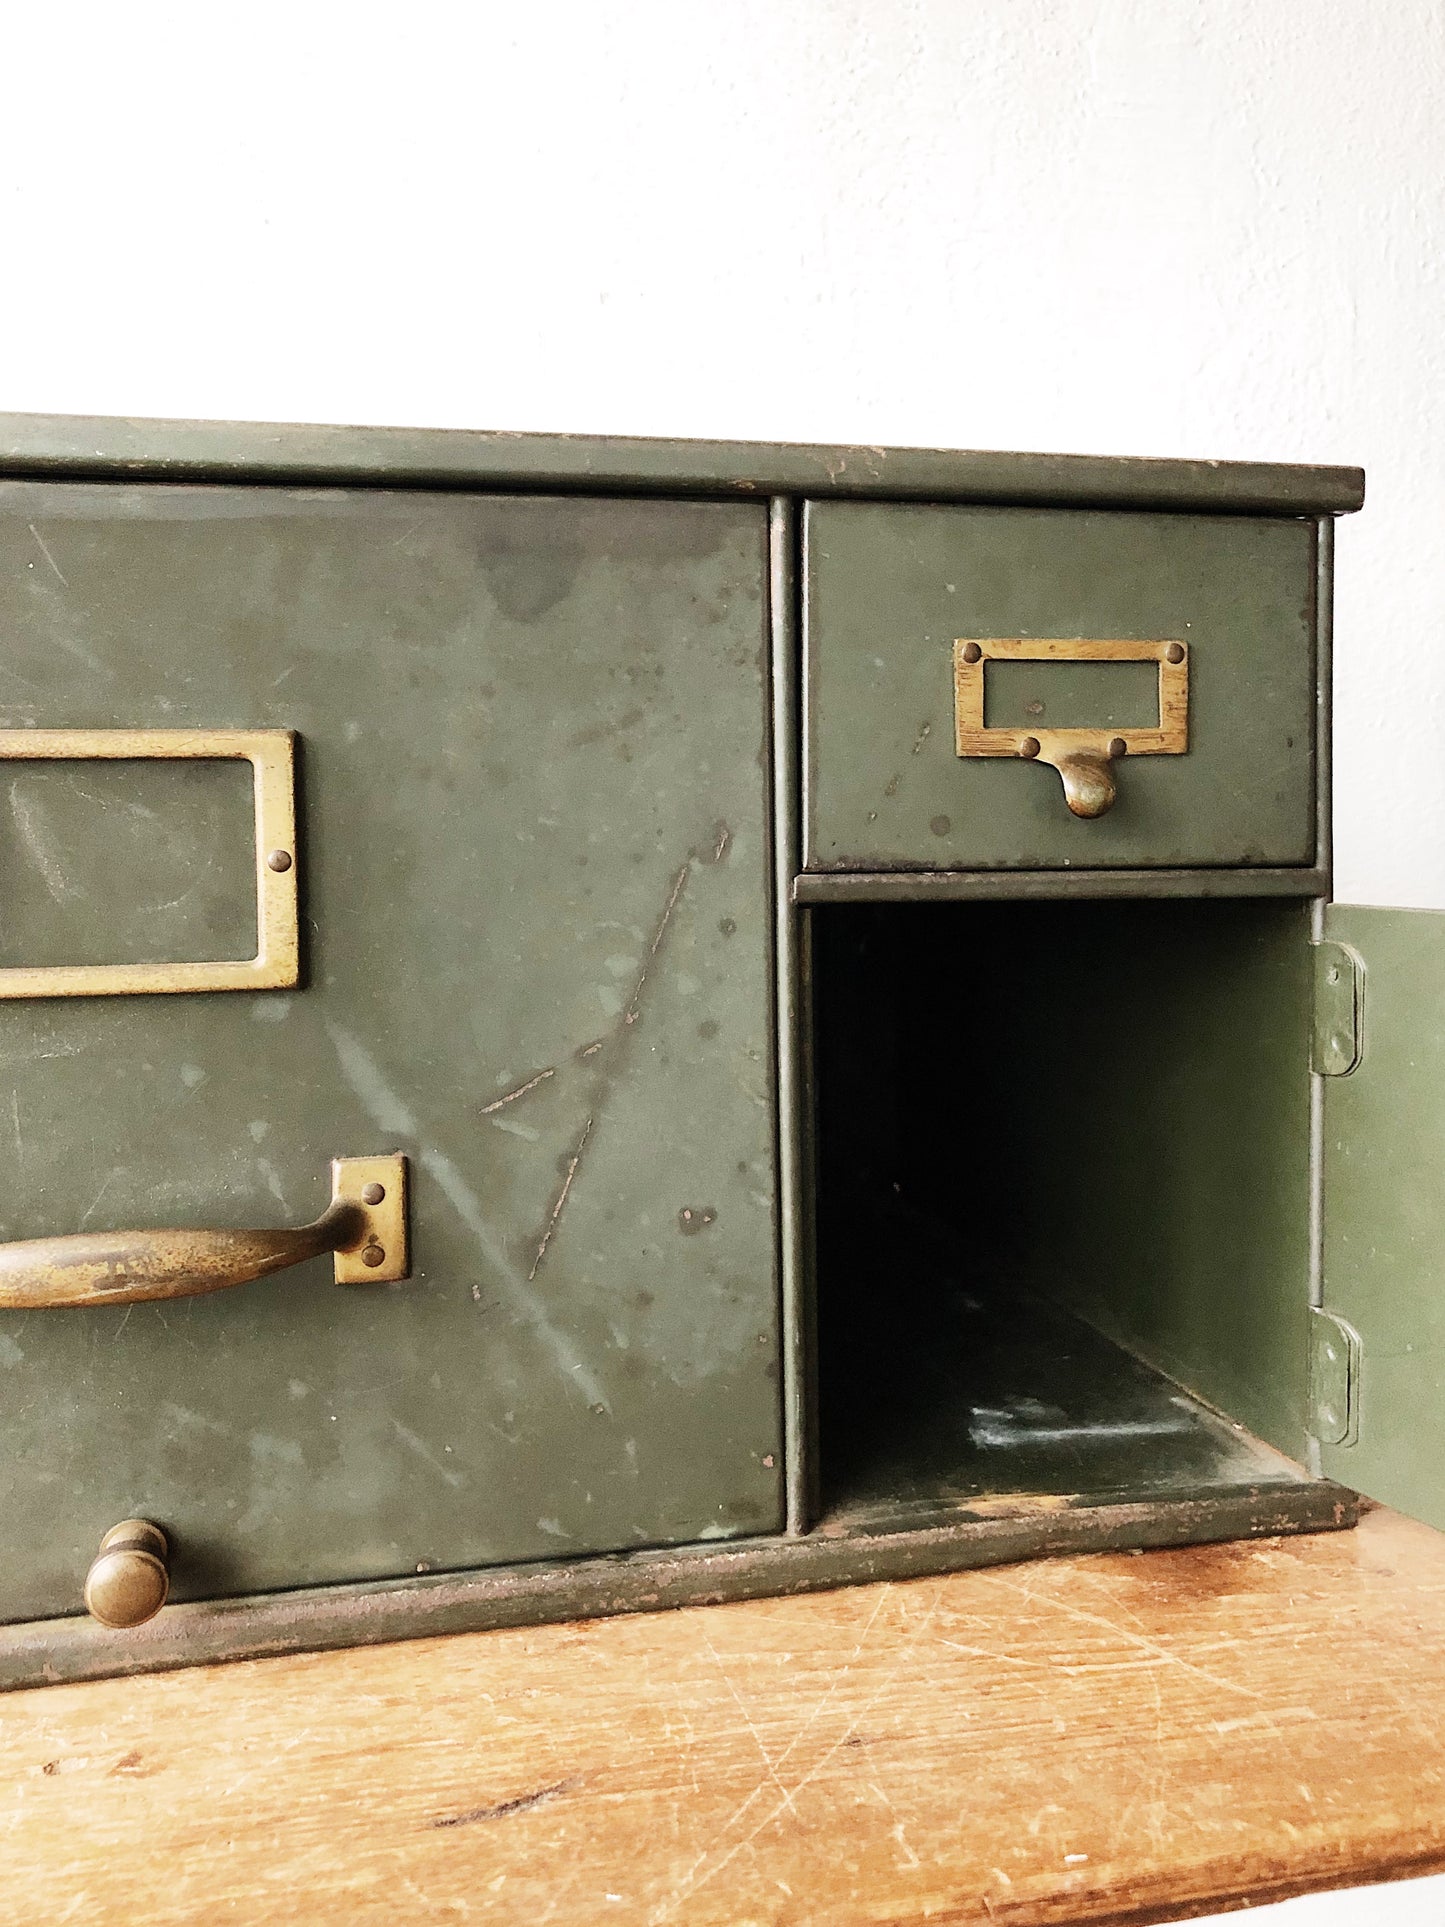 Vintage Military Issue File Cabinet